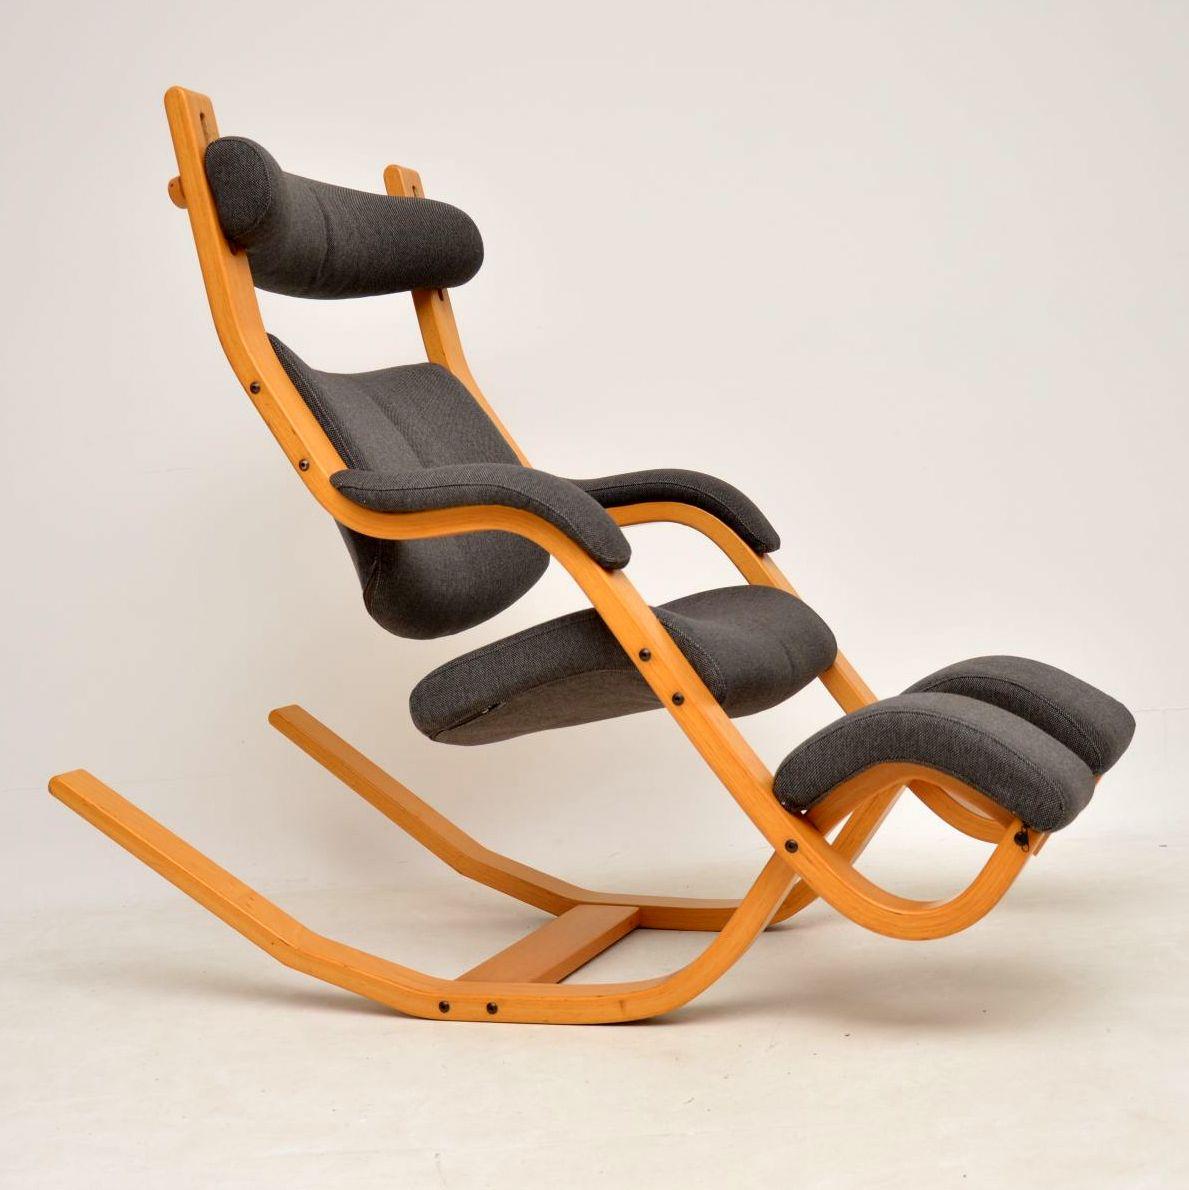 An unbelievably comfortable and iconic design by Peter Opsvik, this is the Gravity Balans recliner, made by Stokke. This dates from the late 20th century, we have had it recently re-upholstered, the condition is very good with just some extremely